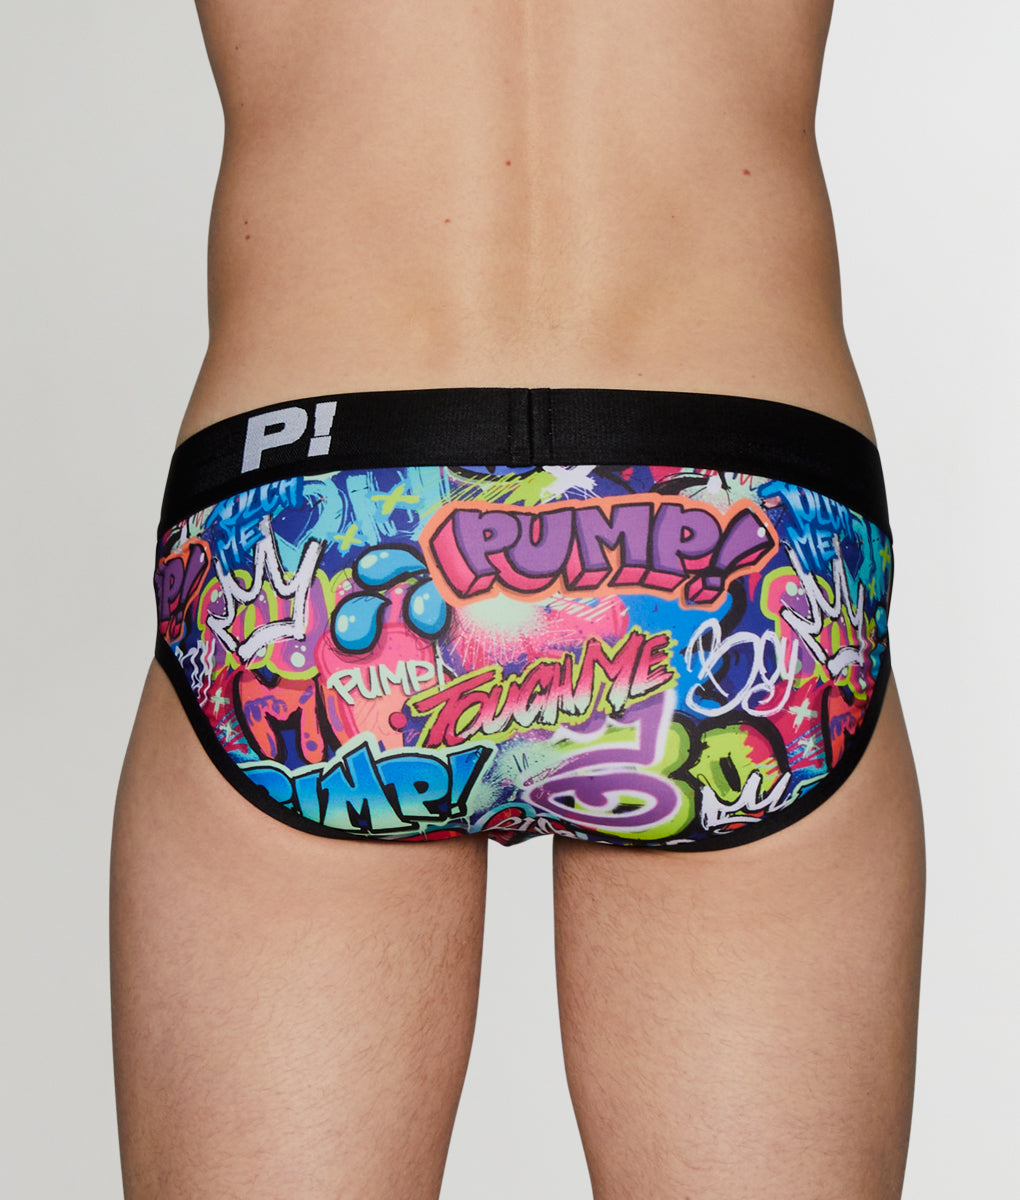 Whether you prefer briefs, boxers, or jockstraps, DRIP, by PUMP! has y